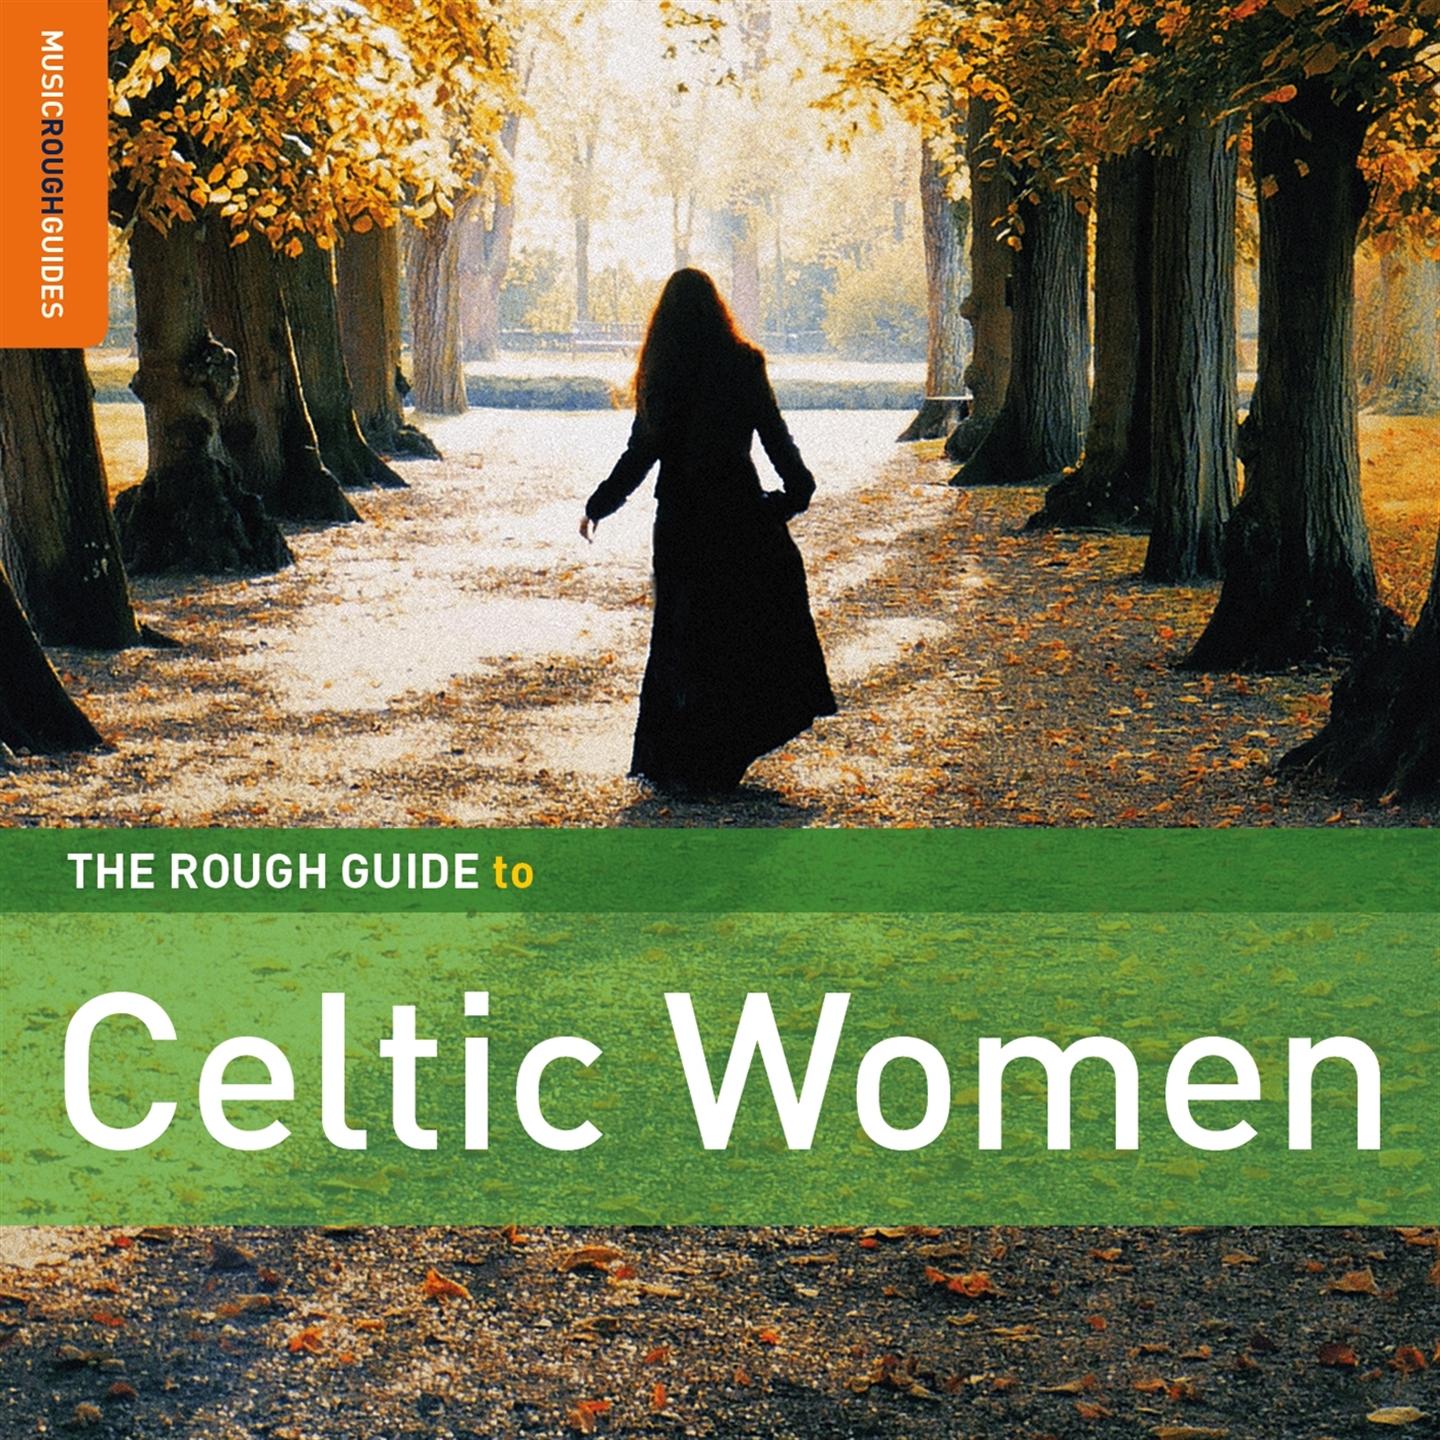 THE ROUGH GUIDE TO CELTIC WOMEN